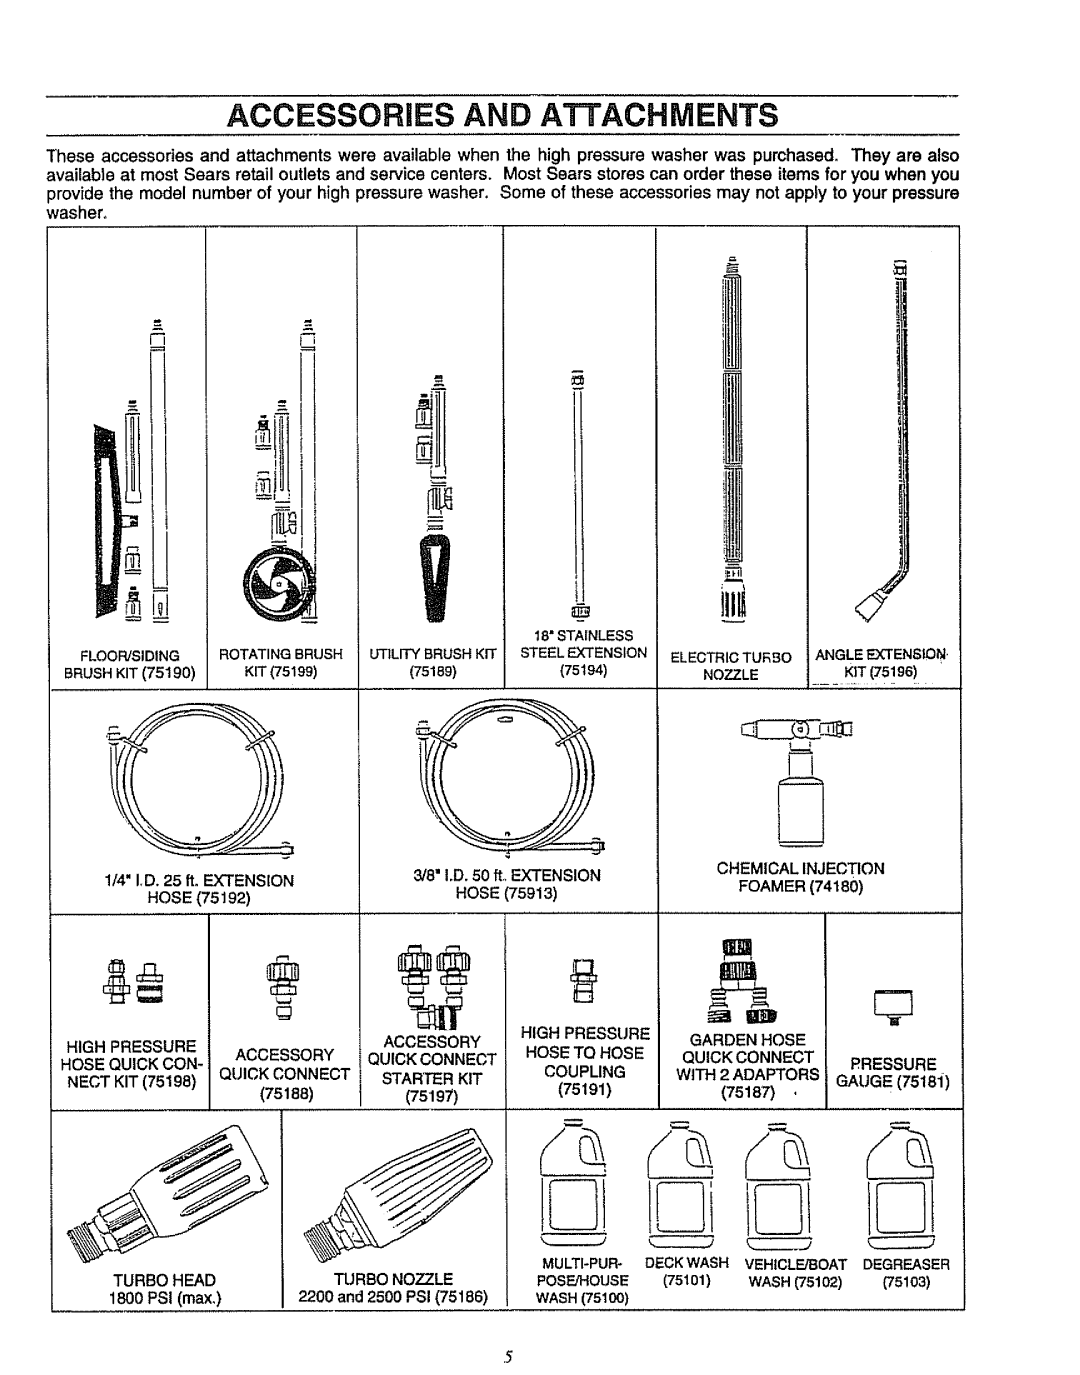 Craftsman 580.751781 owner manual Accessories And Attachments, 75188, Garden Hose 